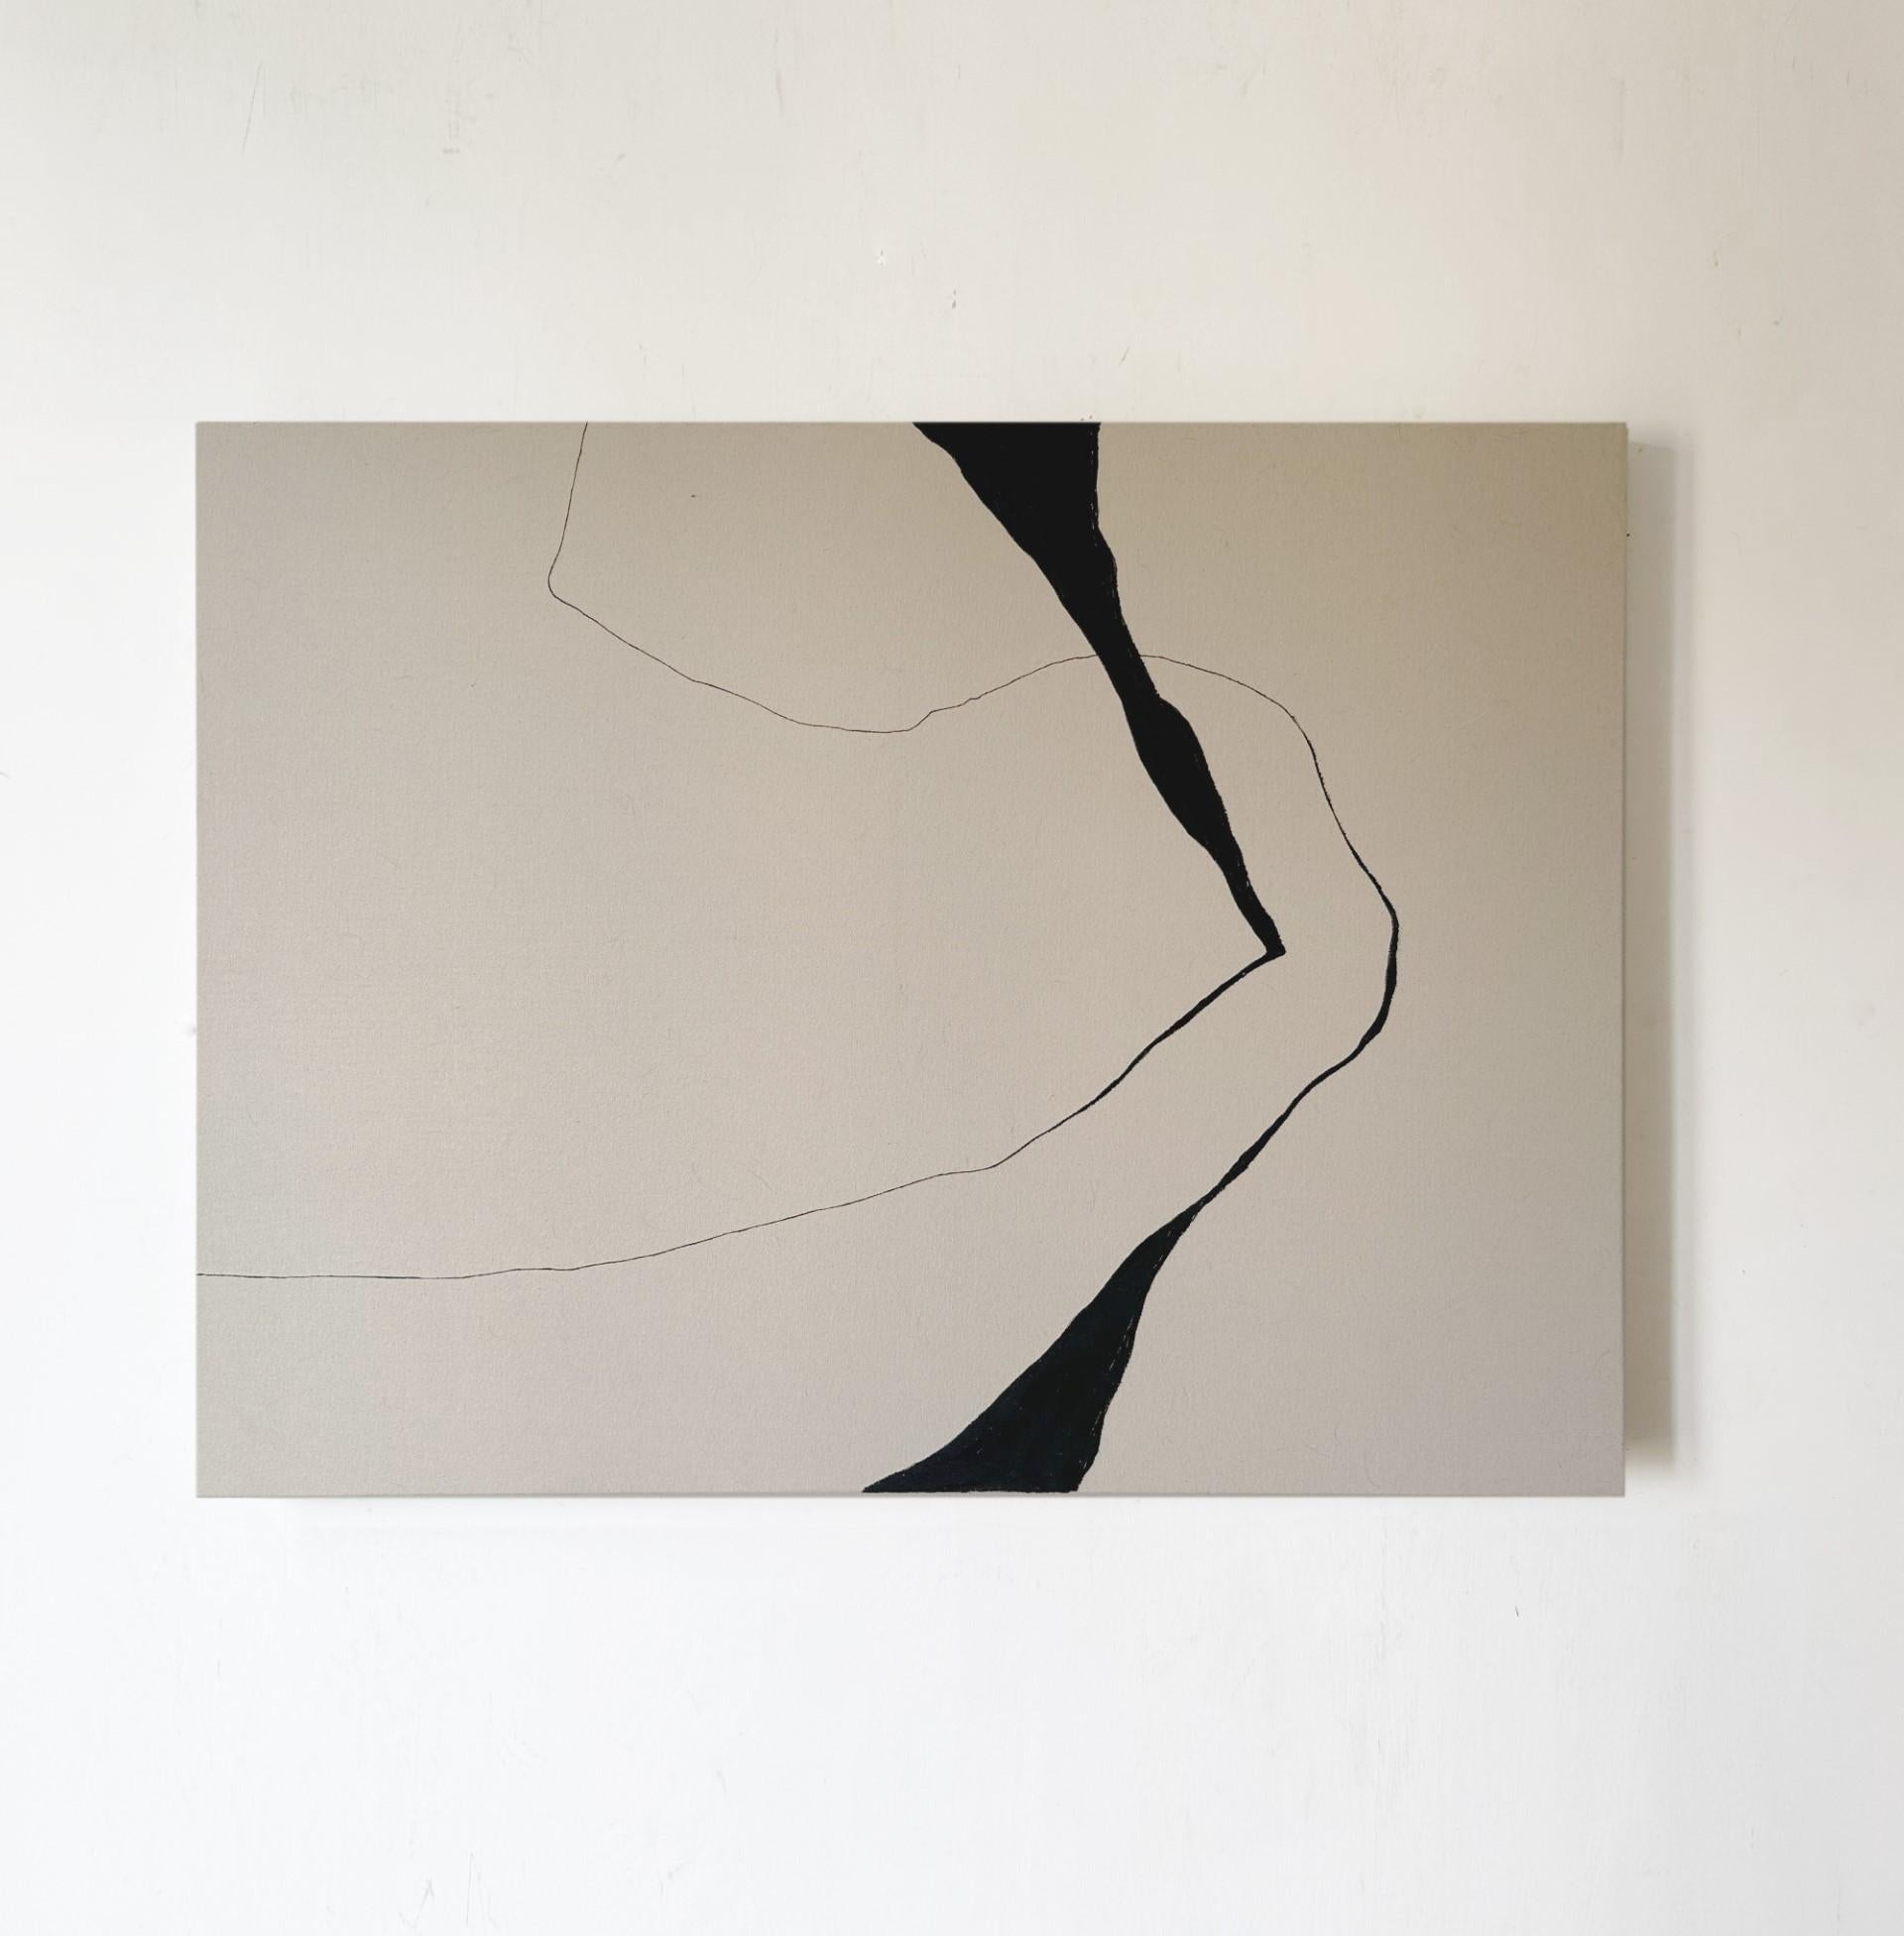 A talented contemporary artist who was born in Barcelona in 1989. Despite her young age, she has made a name for herself on the international art scene thanks to her unique abstract works that focus on the use of black and white.

Her artistic